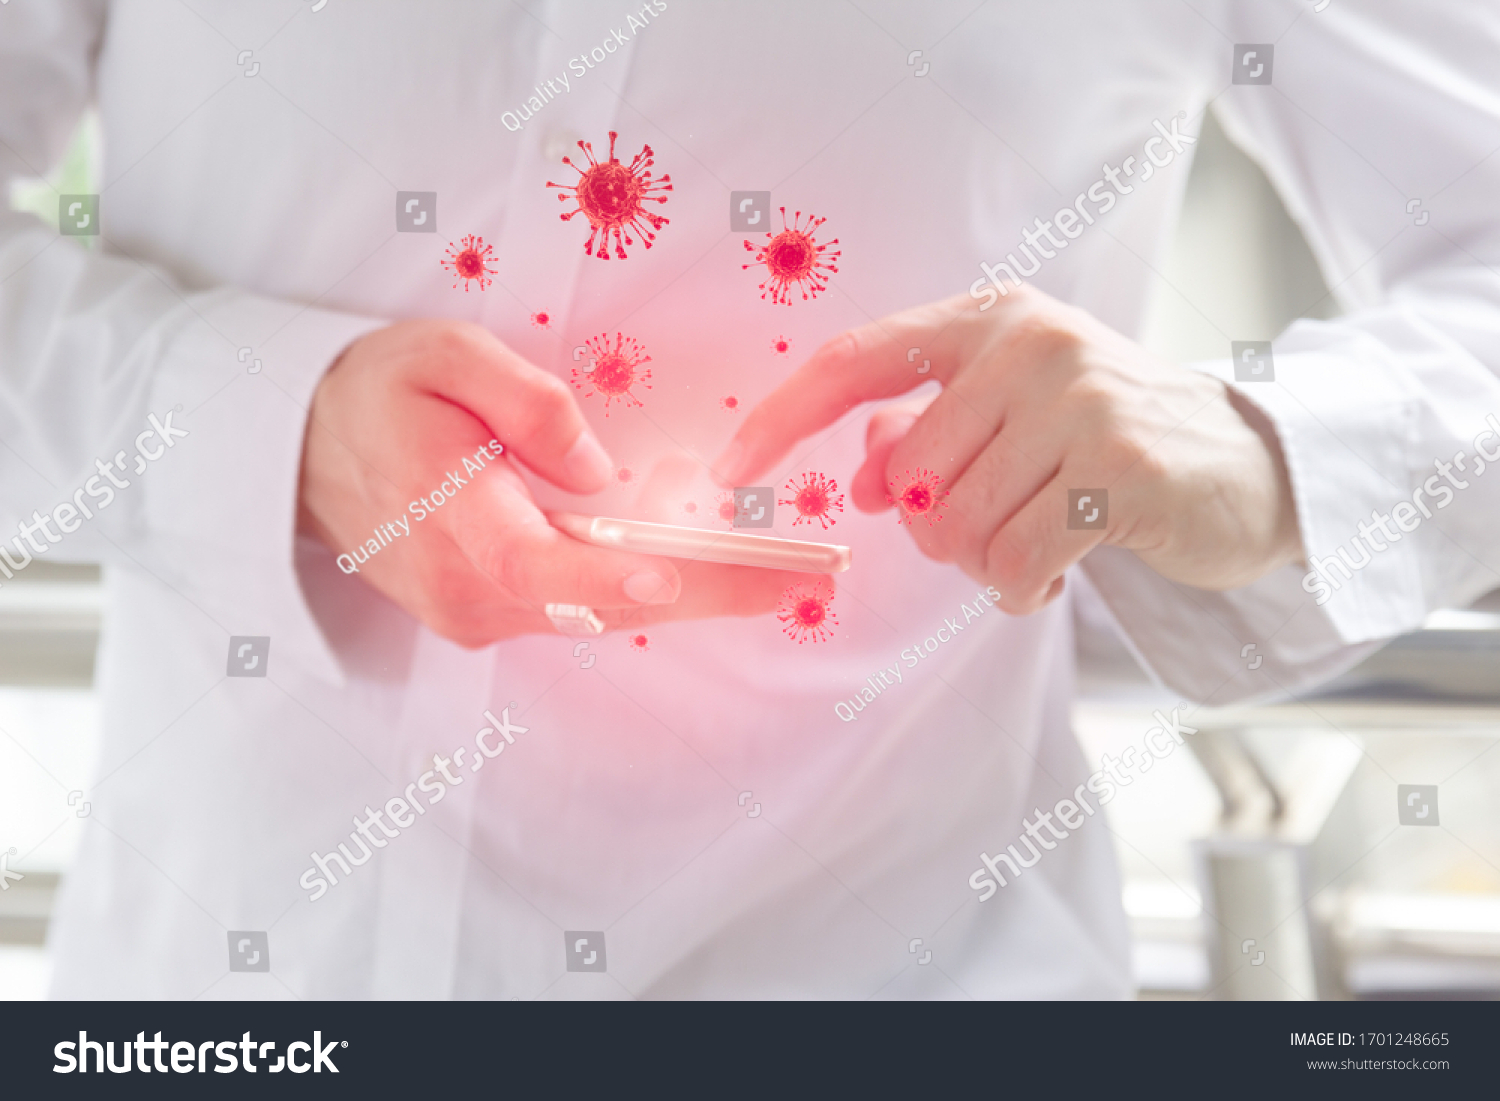 Dirty phones can spread Coronavirus, Closeup finger using smartphone touchscreen transfer dirty virus infected to hand. #1701248665